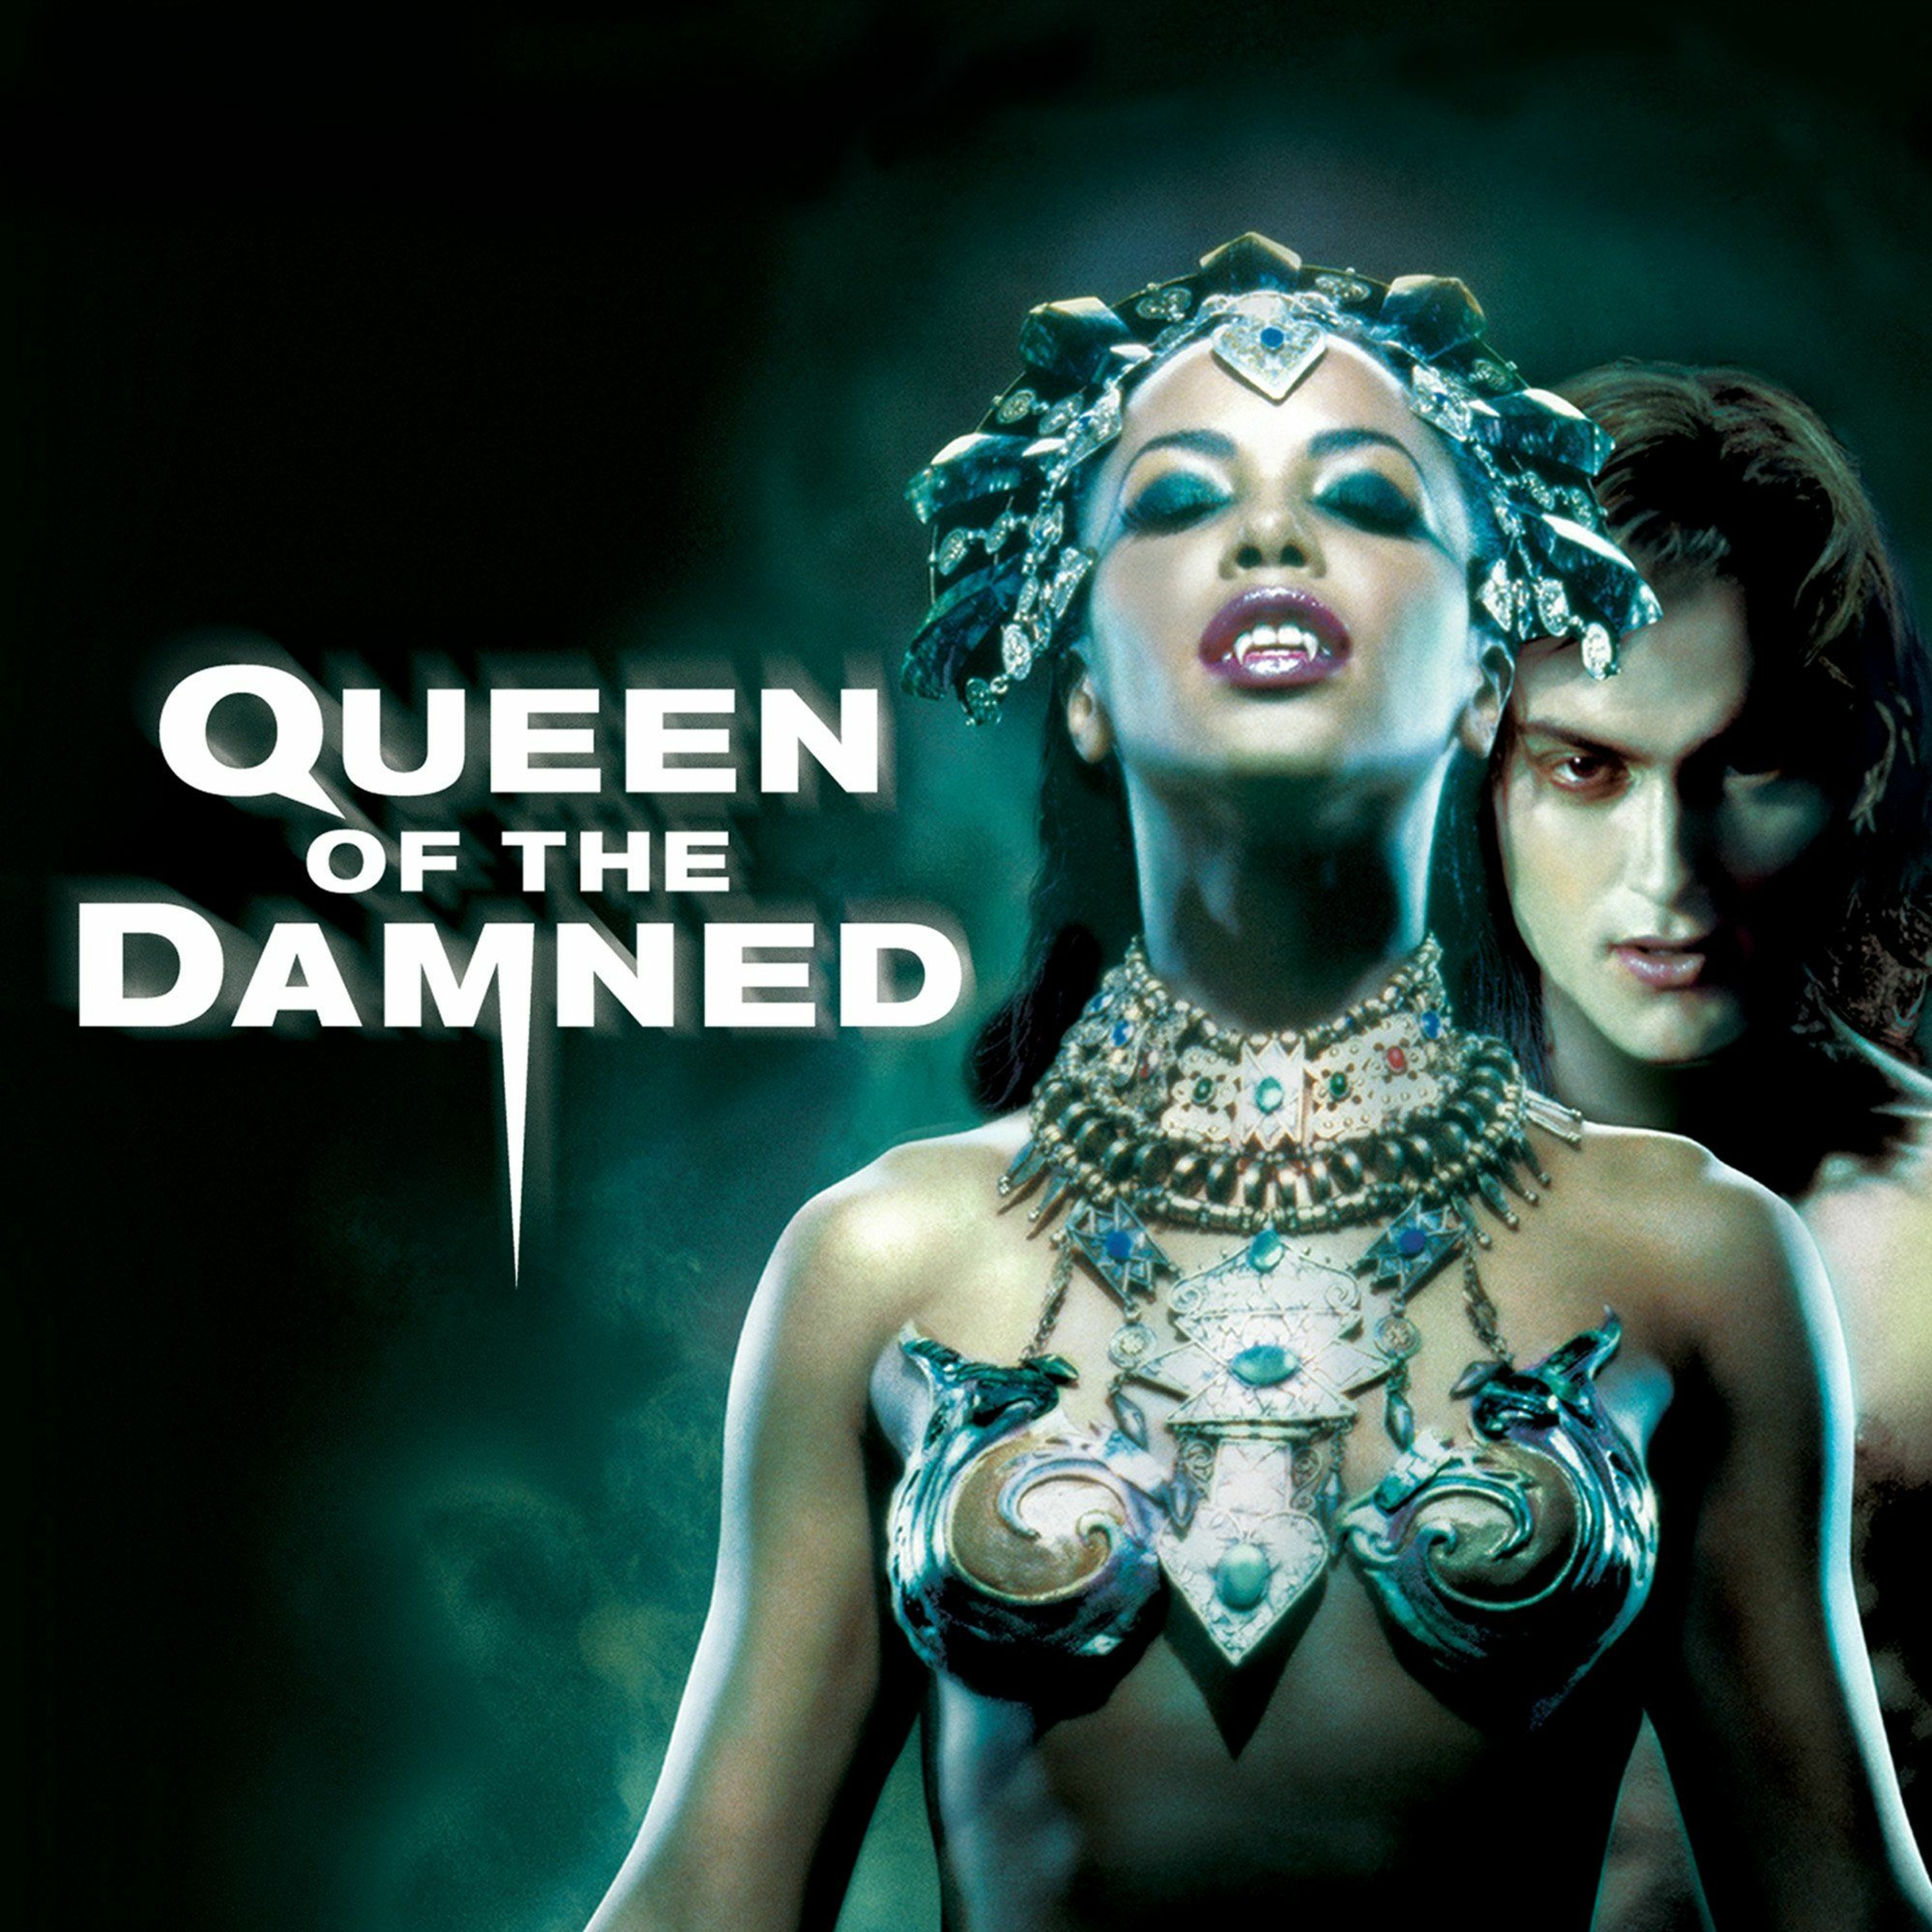 Queen of the Damned (2002) - Film Analysis - Bringing Down The GrindHouse -...